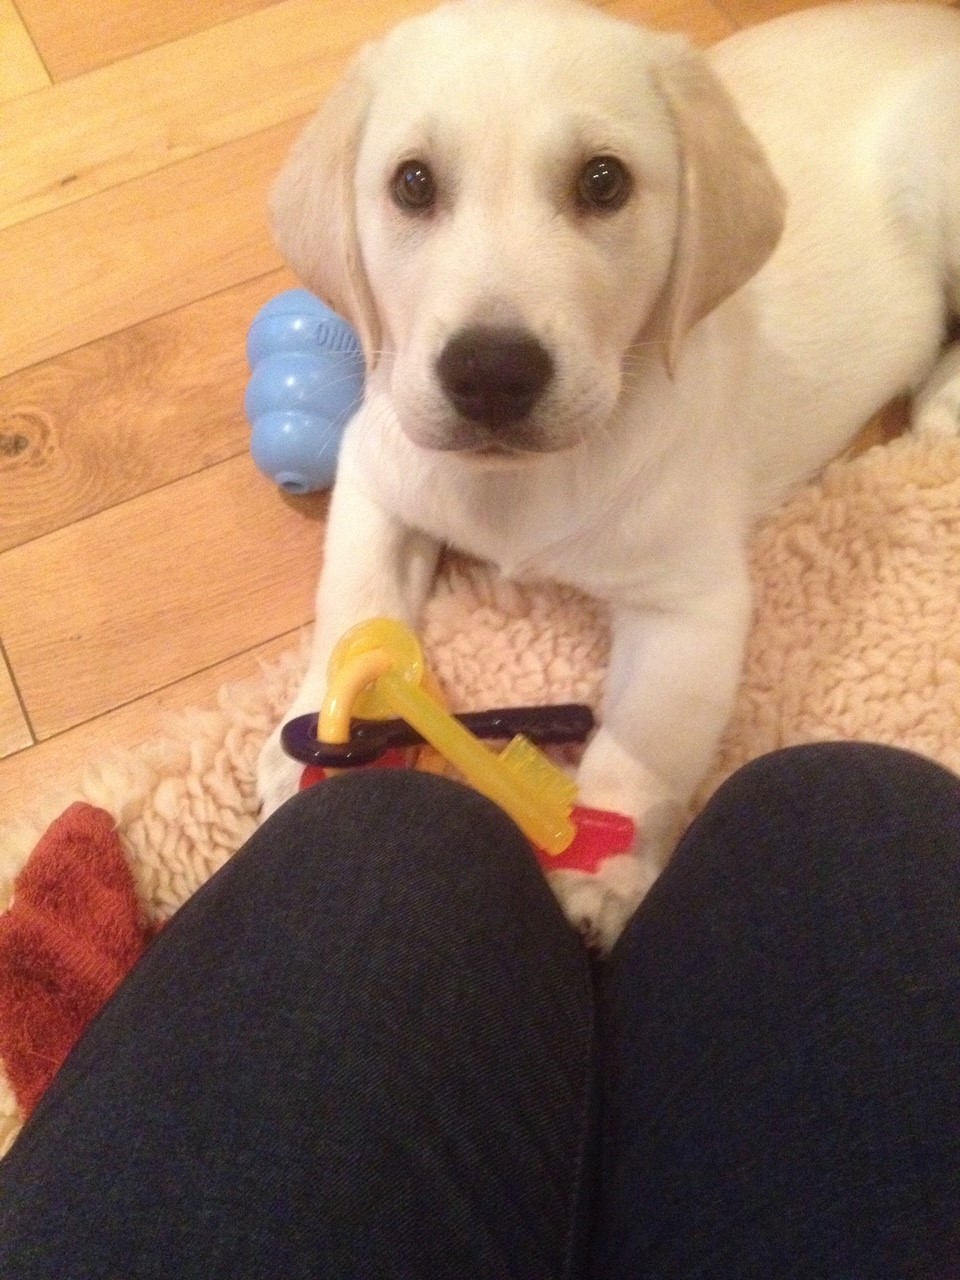 Ringo, a yellow labrador puppy, lays by a volunteer's knees and looks at the camera. He has a set of toy keys in his paws.